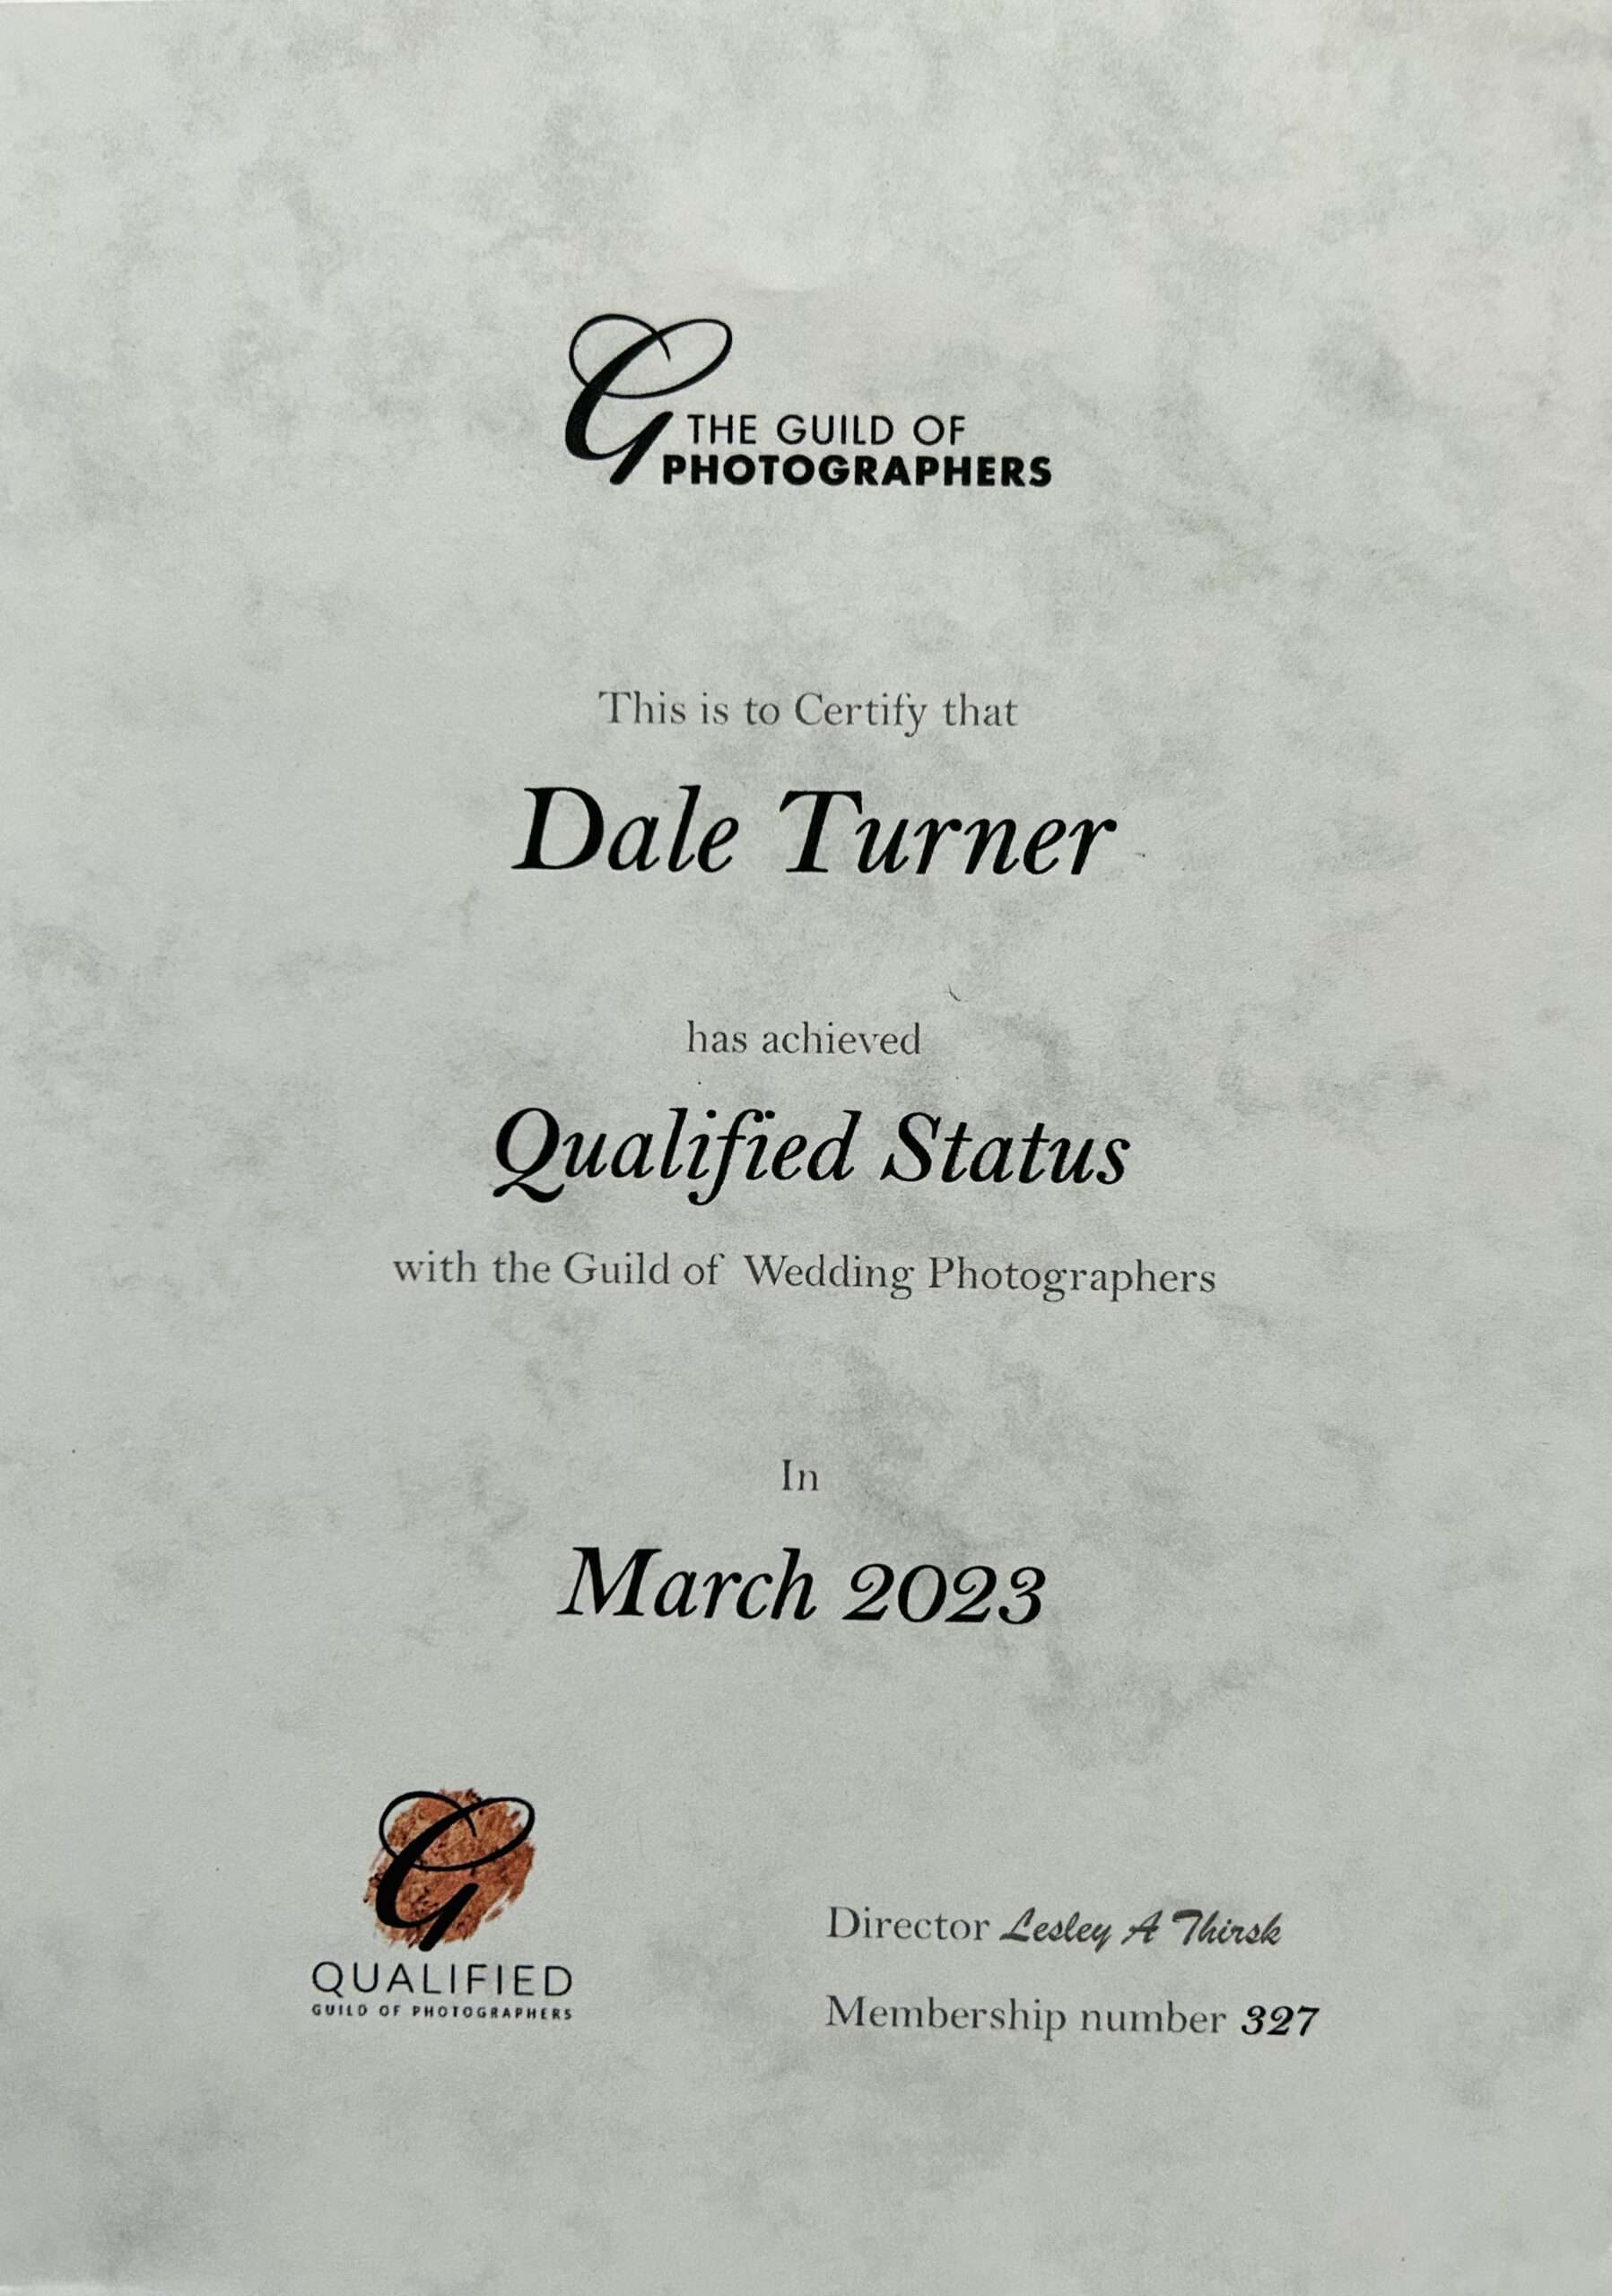 A certificate to show Dale Turner is a fully Qualified member of The Guild of Photographers.